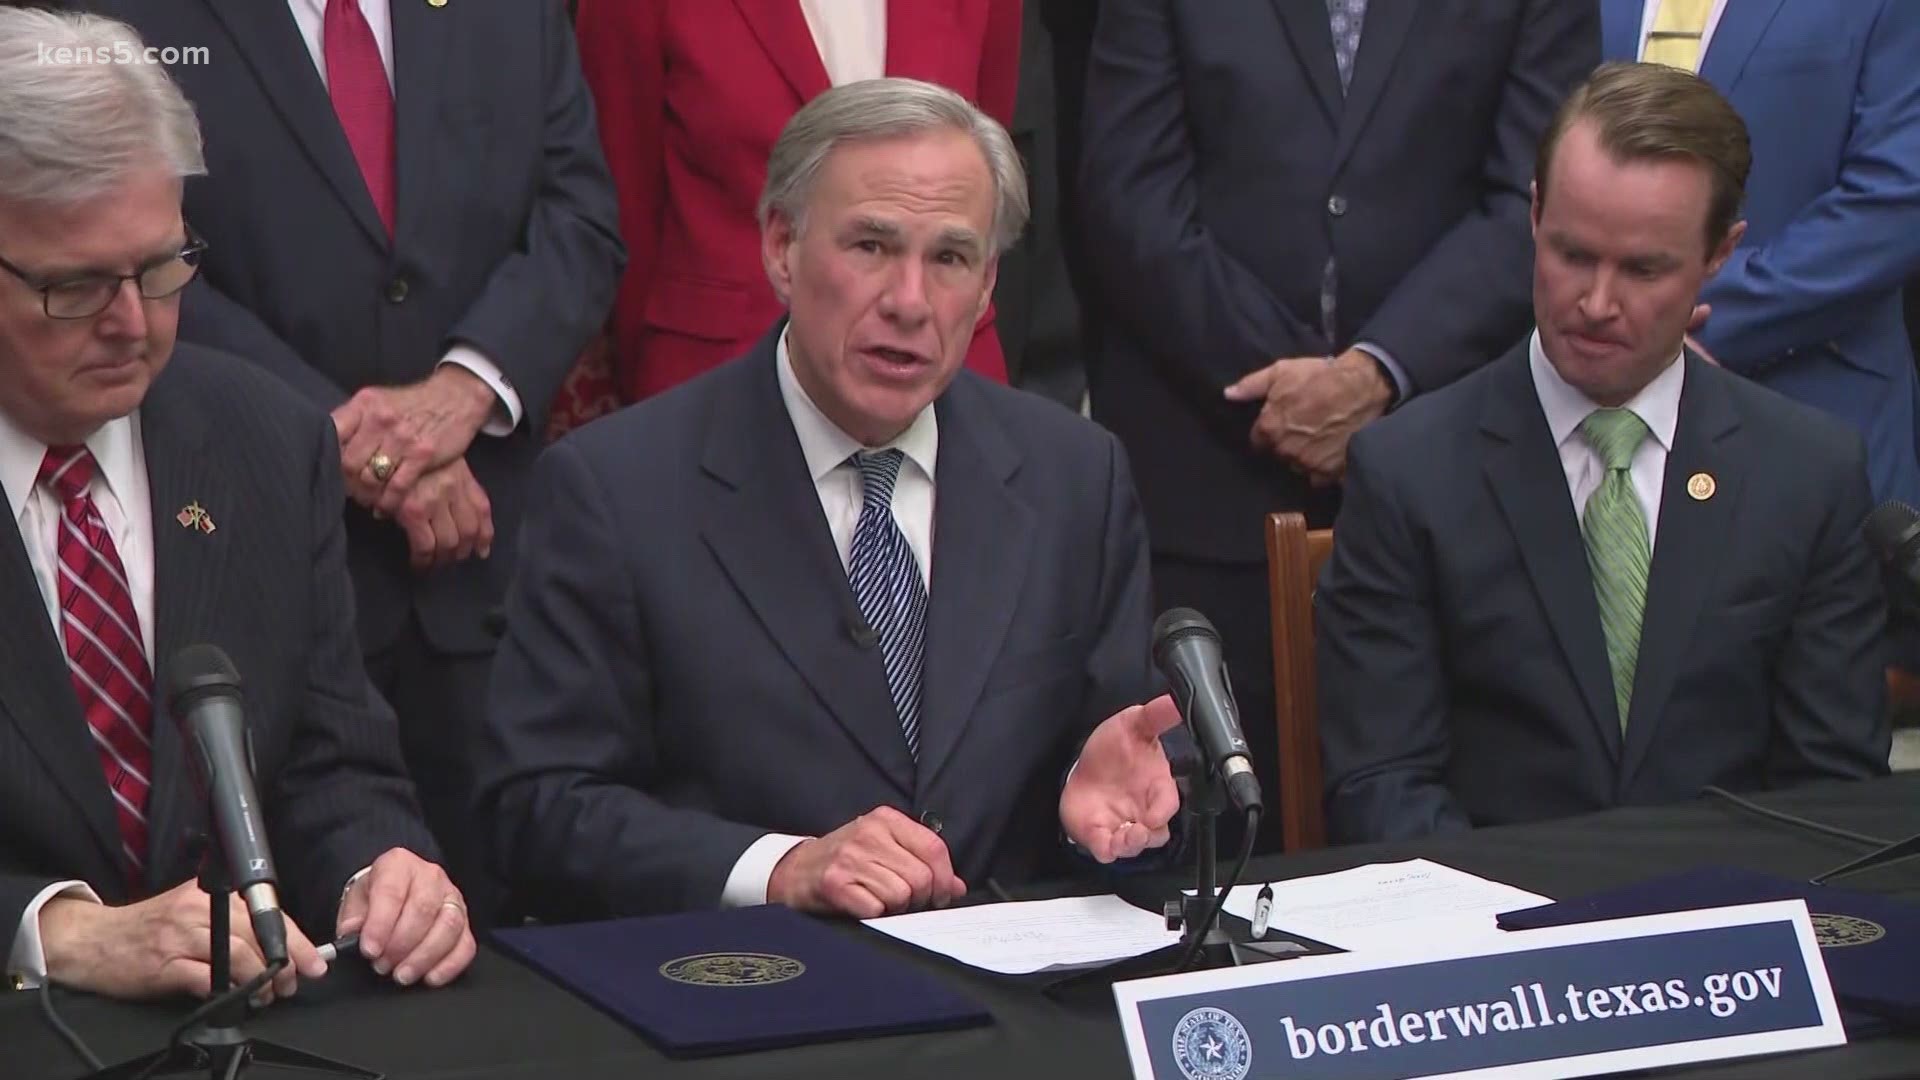 The governor said the money allocated will get things started by paying for a project manager and for negotiations with land owners on the Texas border.